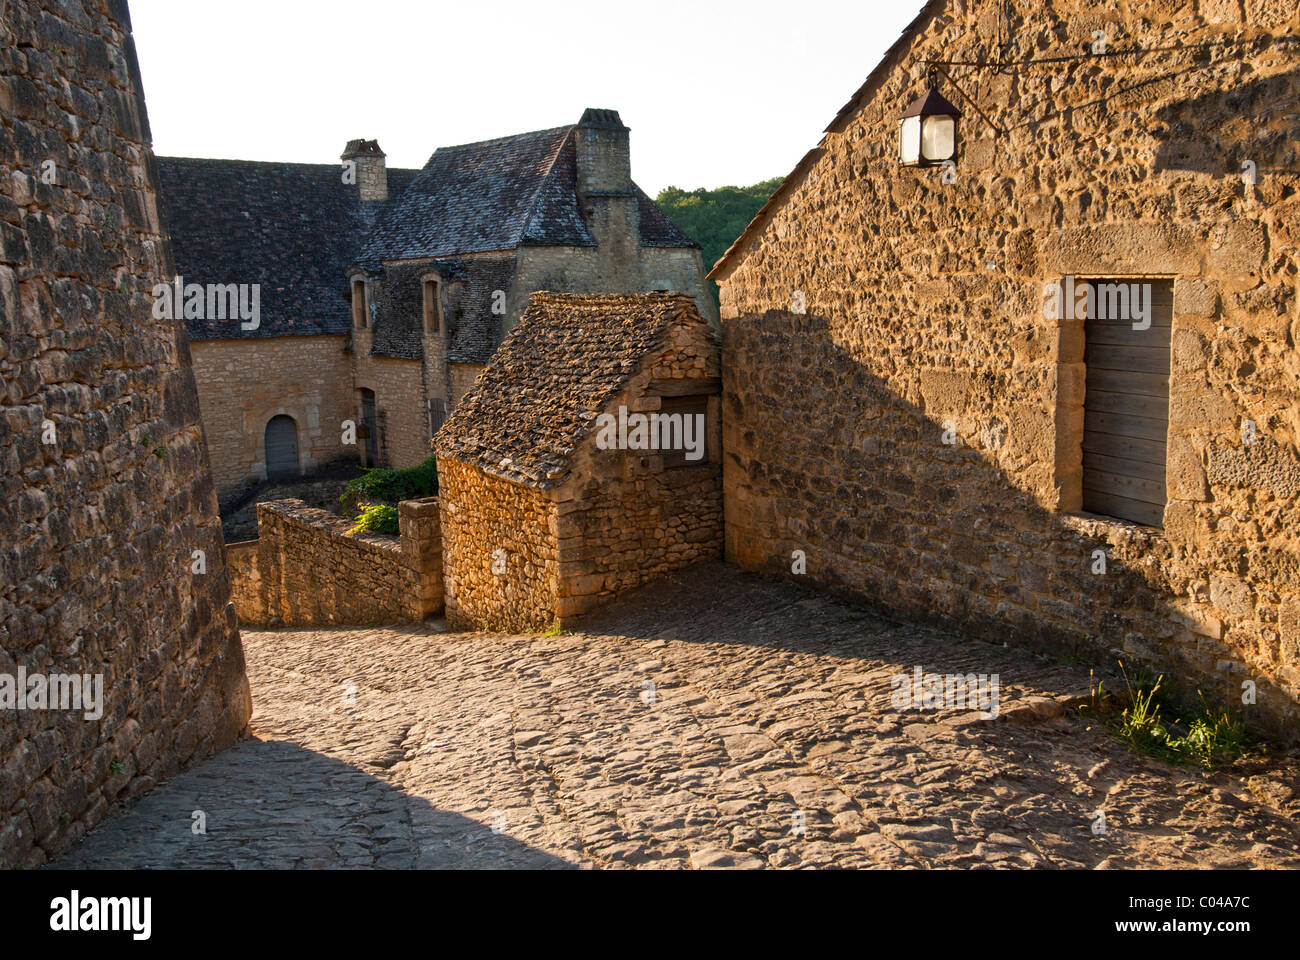 Beynac et-Cazenac, on river Dordogne, Aquitaine, South West France. Hilltop medieval town. Stone walls and path Stock Photo